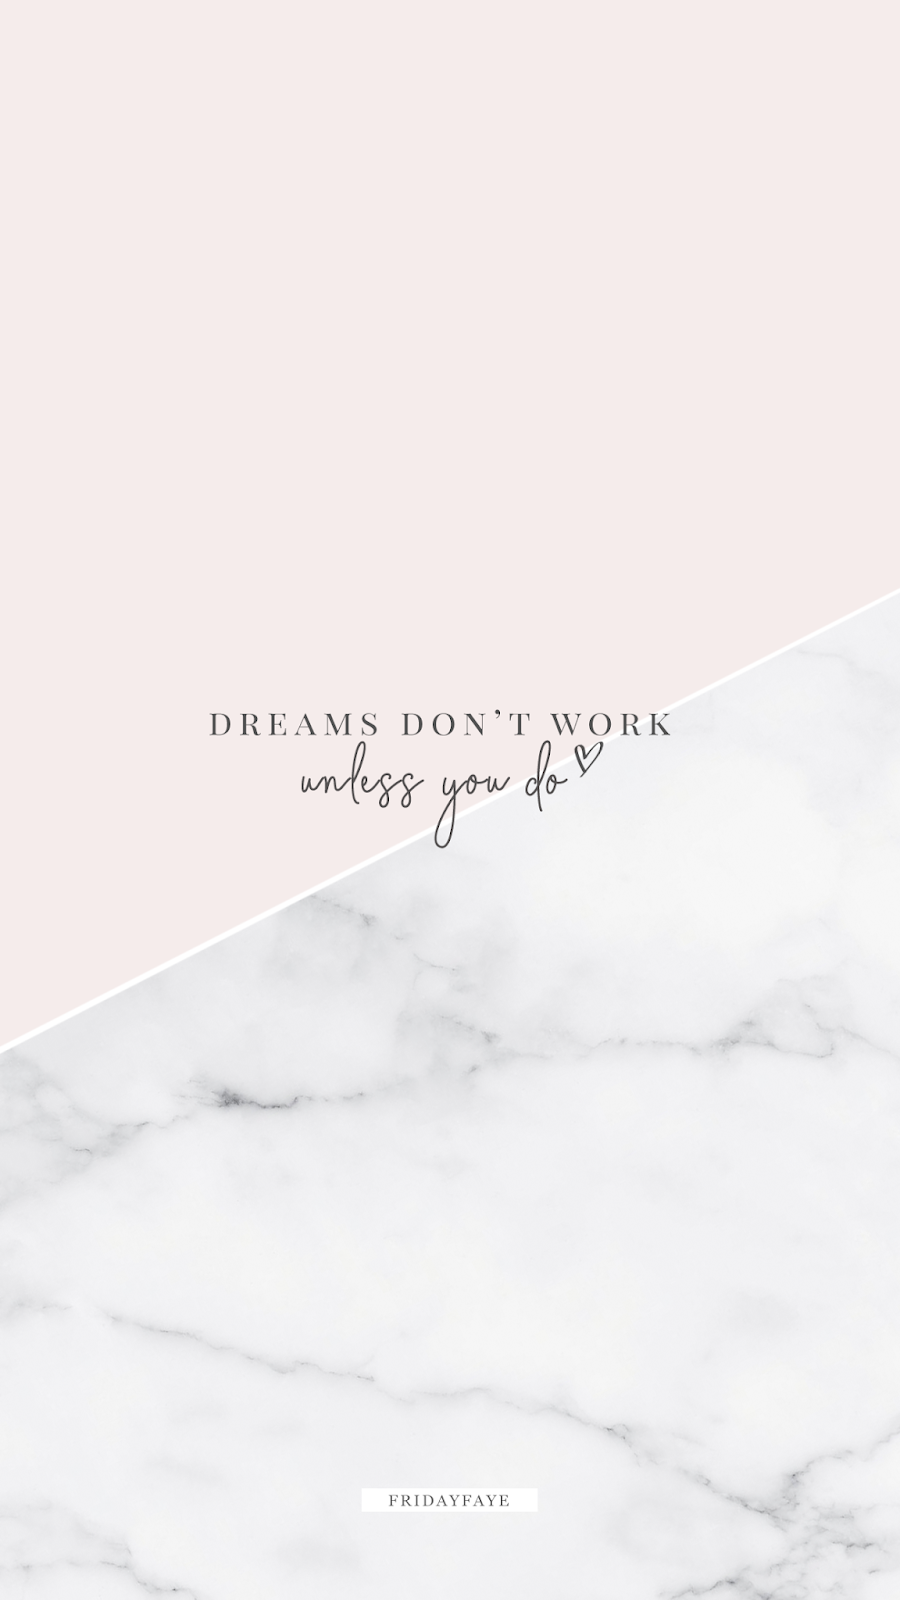 Dreams Don't Work Unless You Do. Motivational quotes wallpaper, Motivational wallpaper, Inspirational phone wallpaper